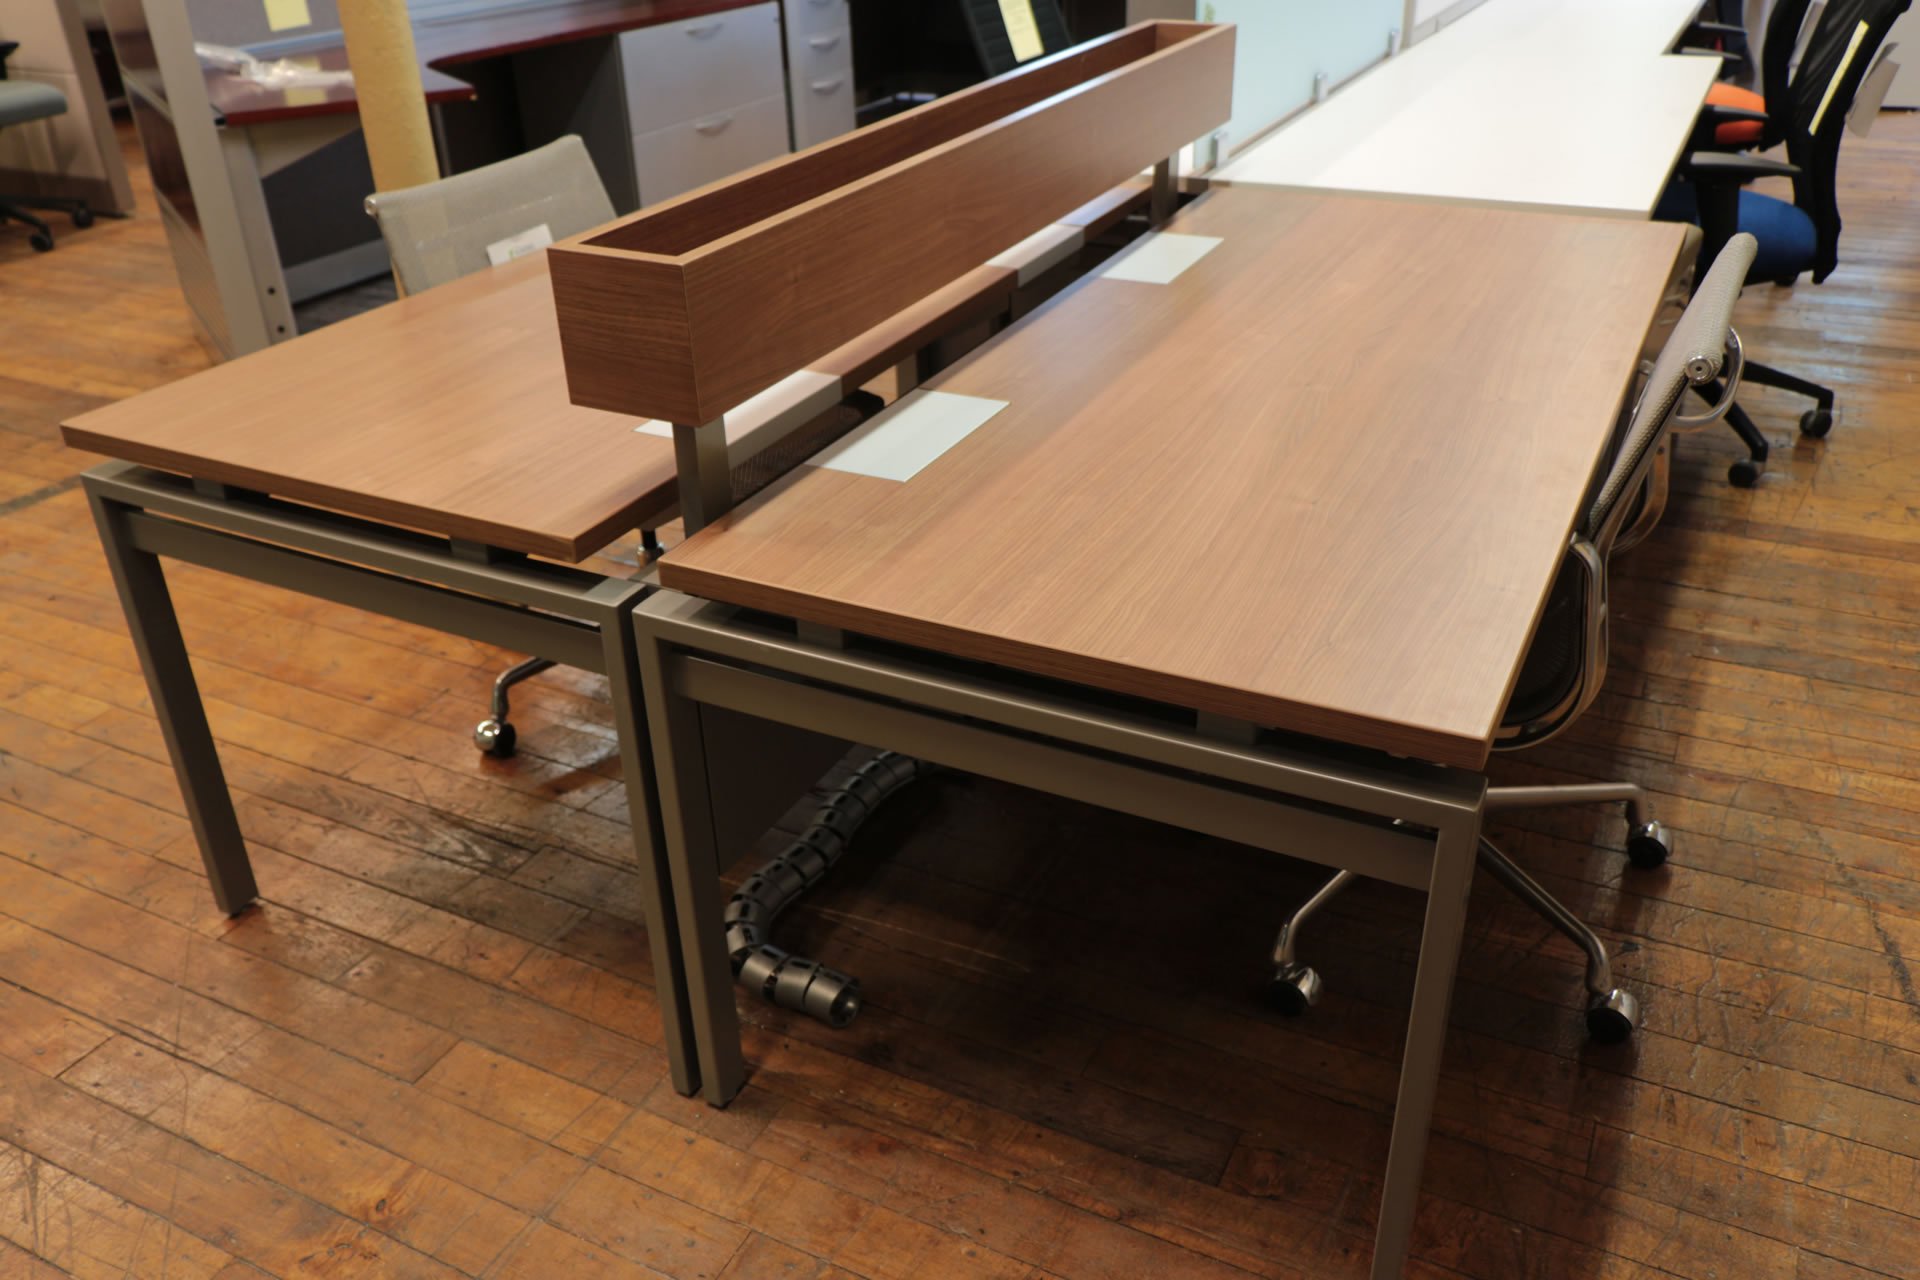 Inscape Benching Systems – Walnut with Silver Metallic Trim